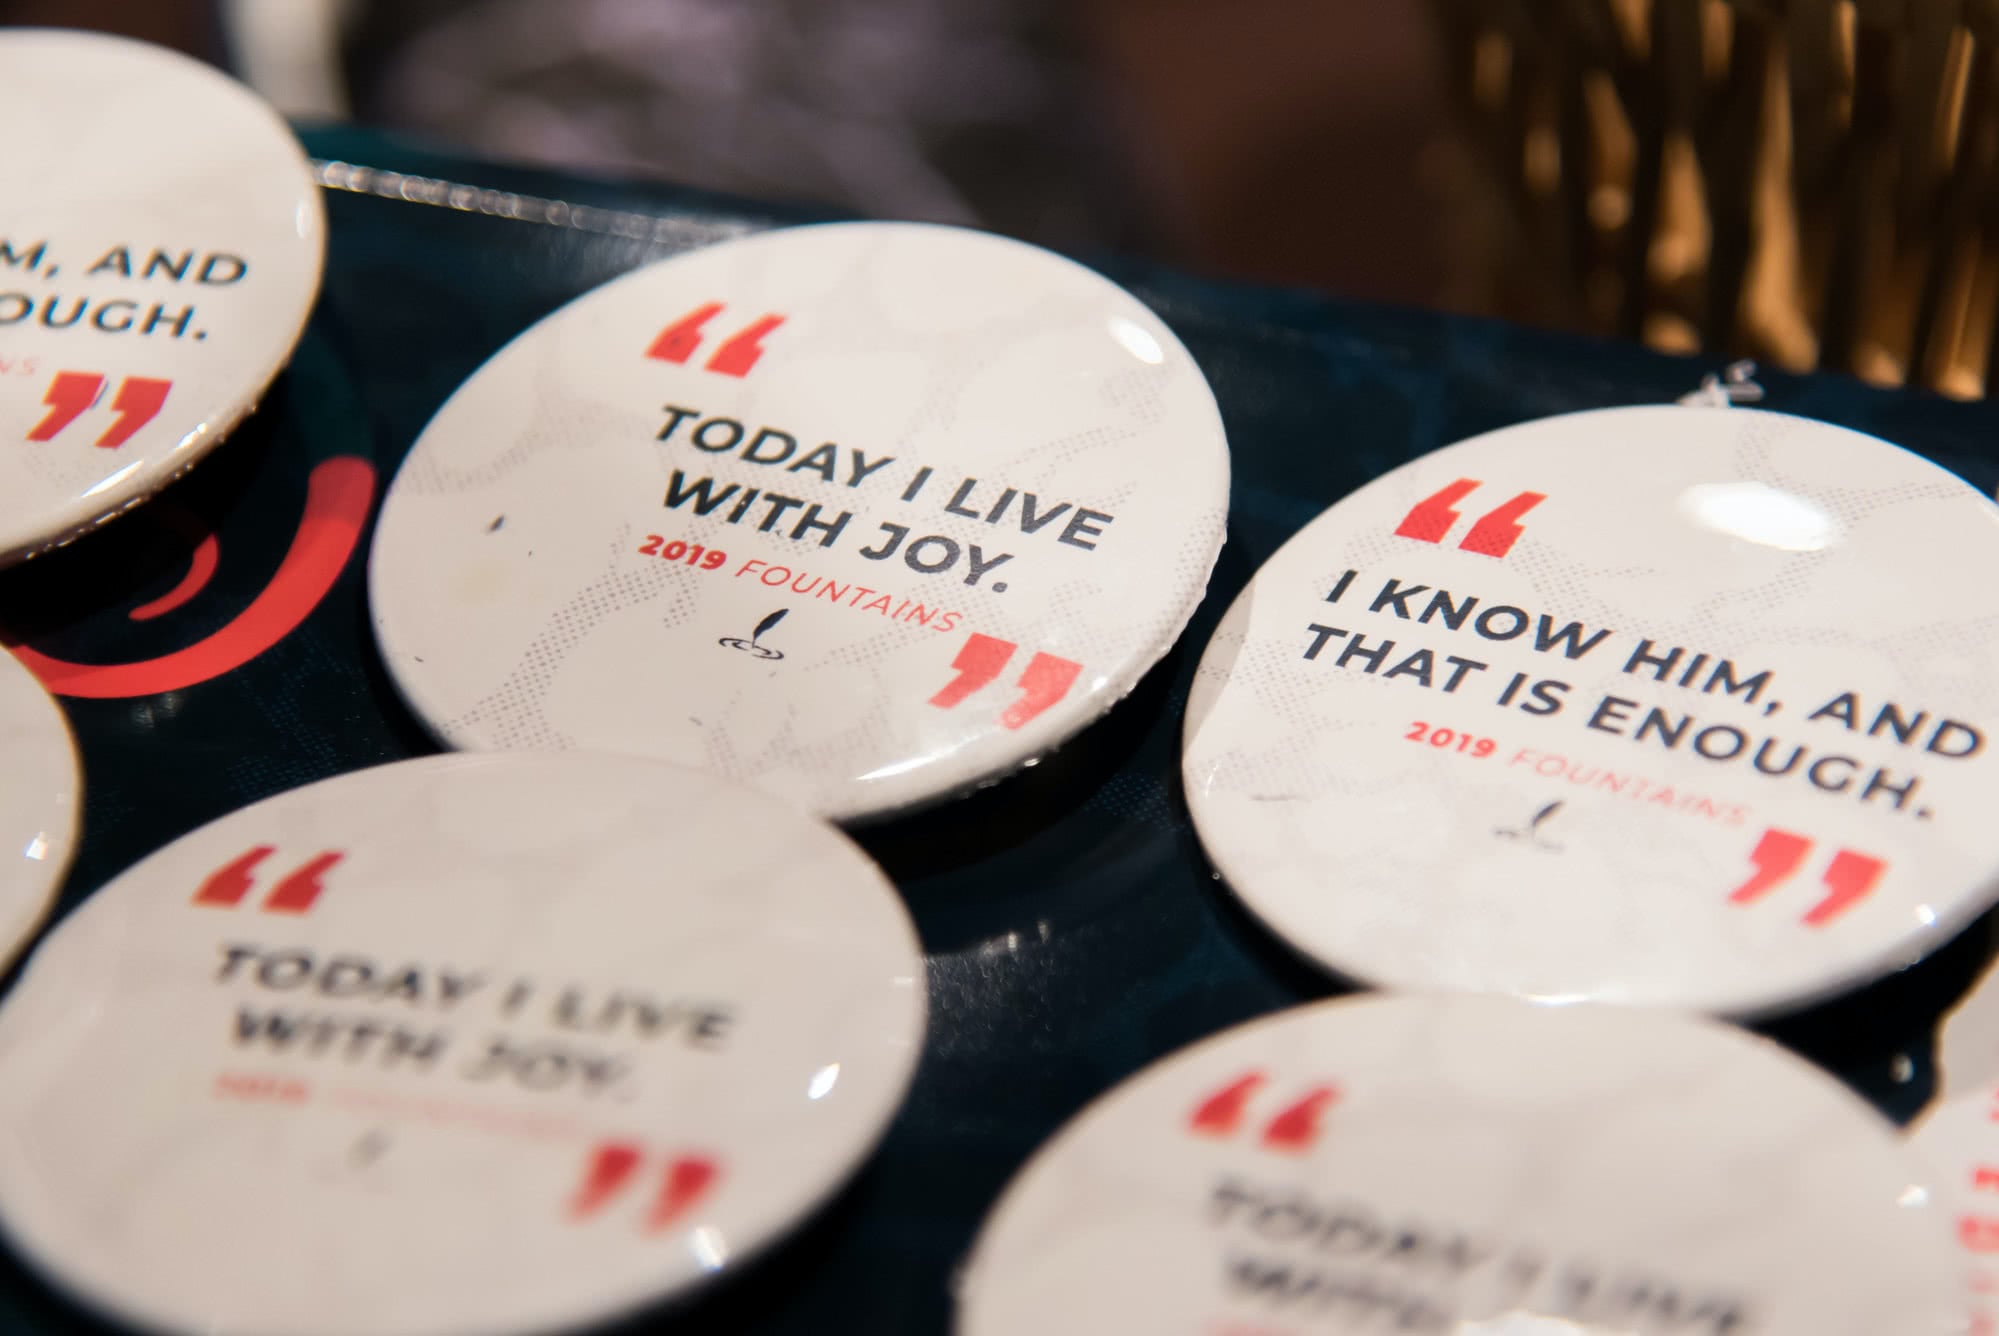 "Today I Live With Joy" Fountains 2019 buttons. 